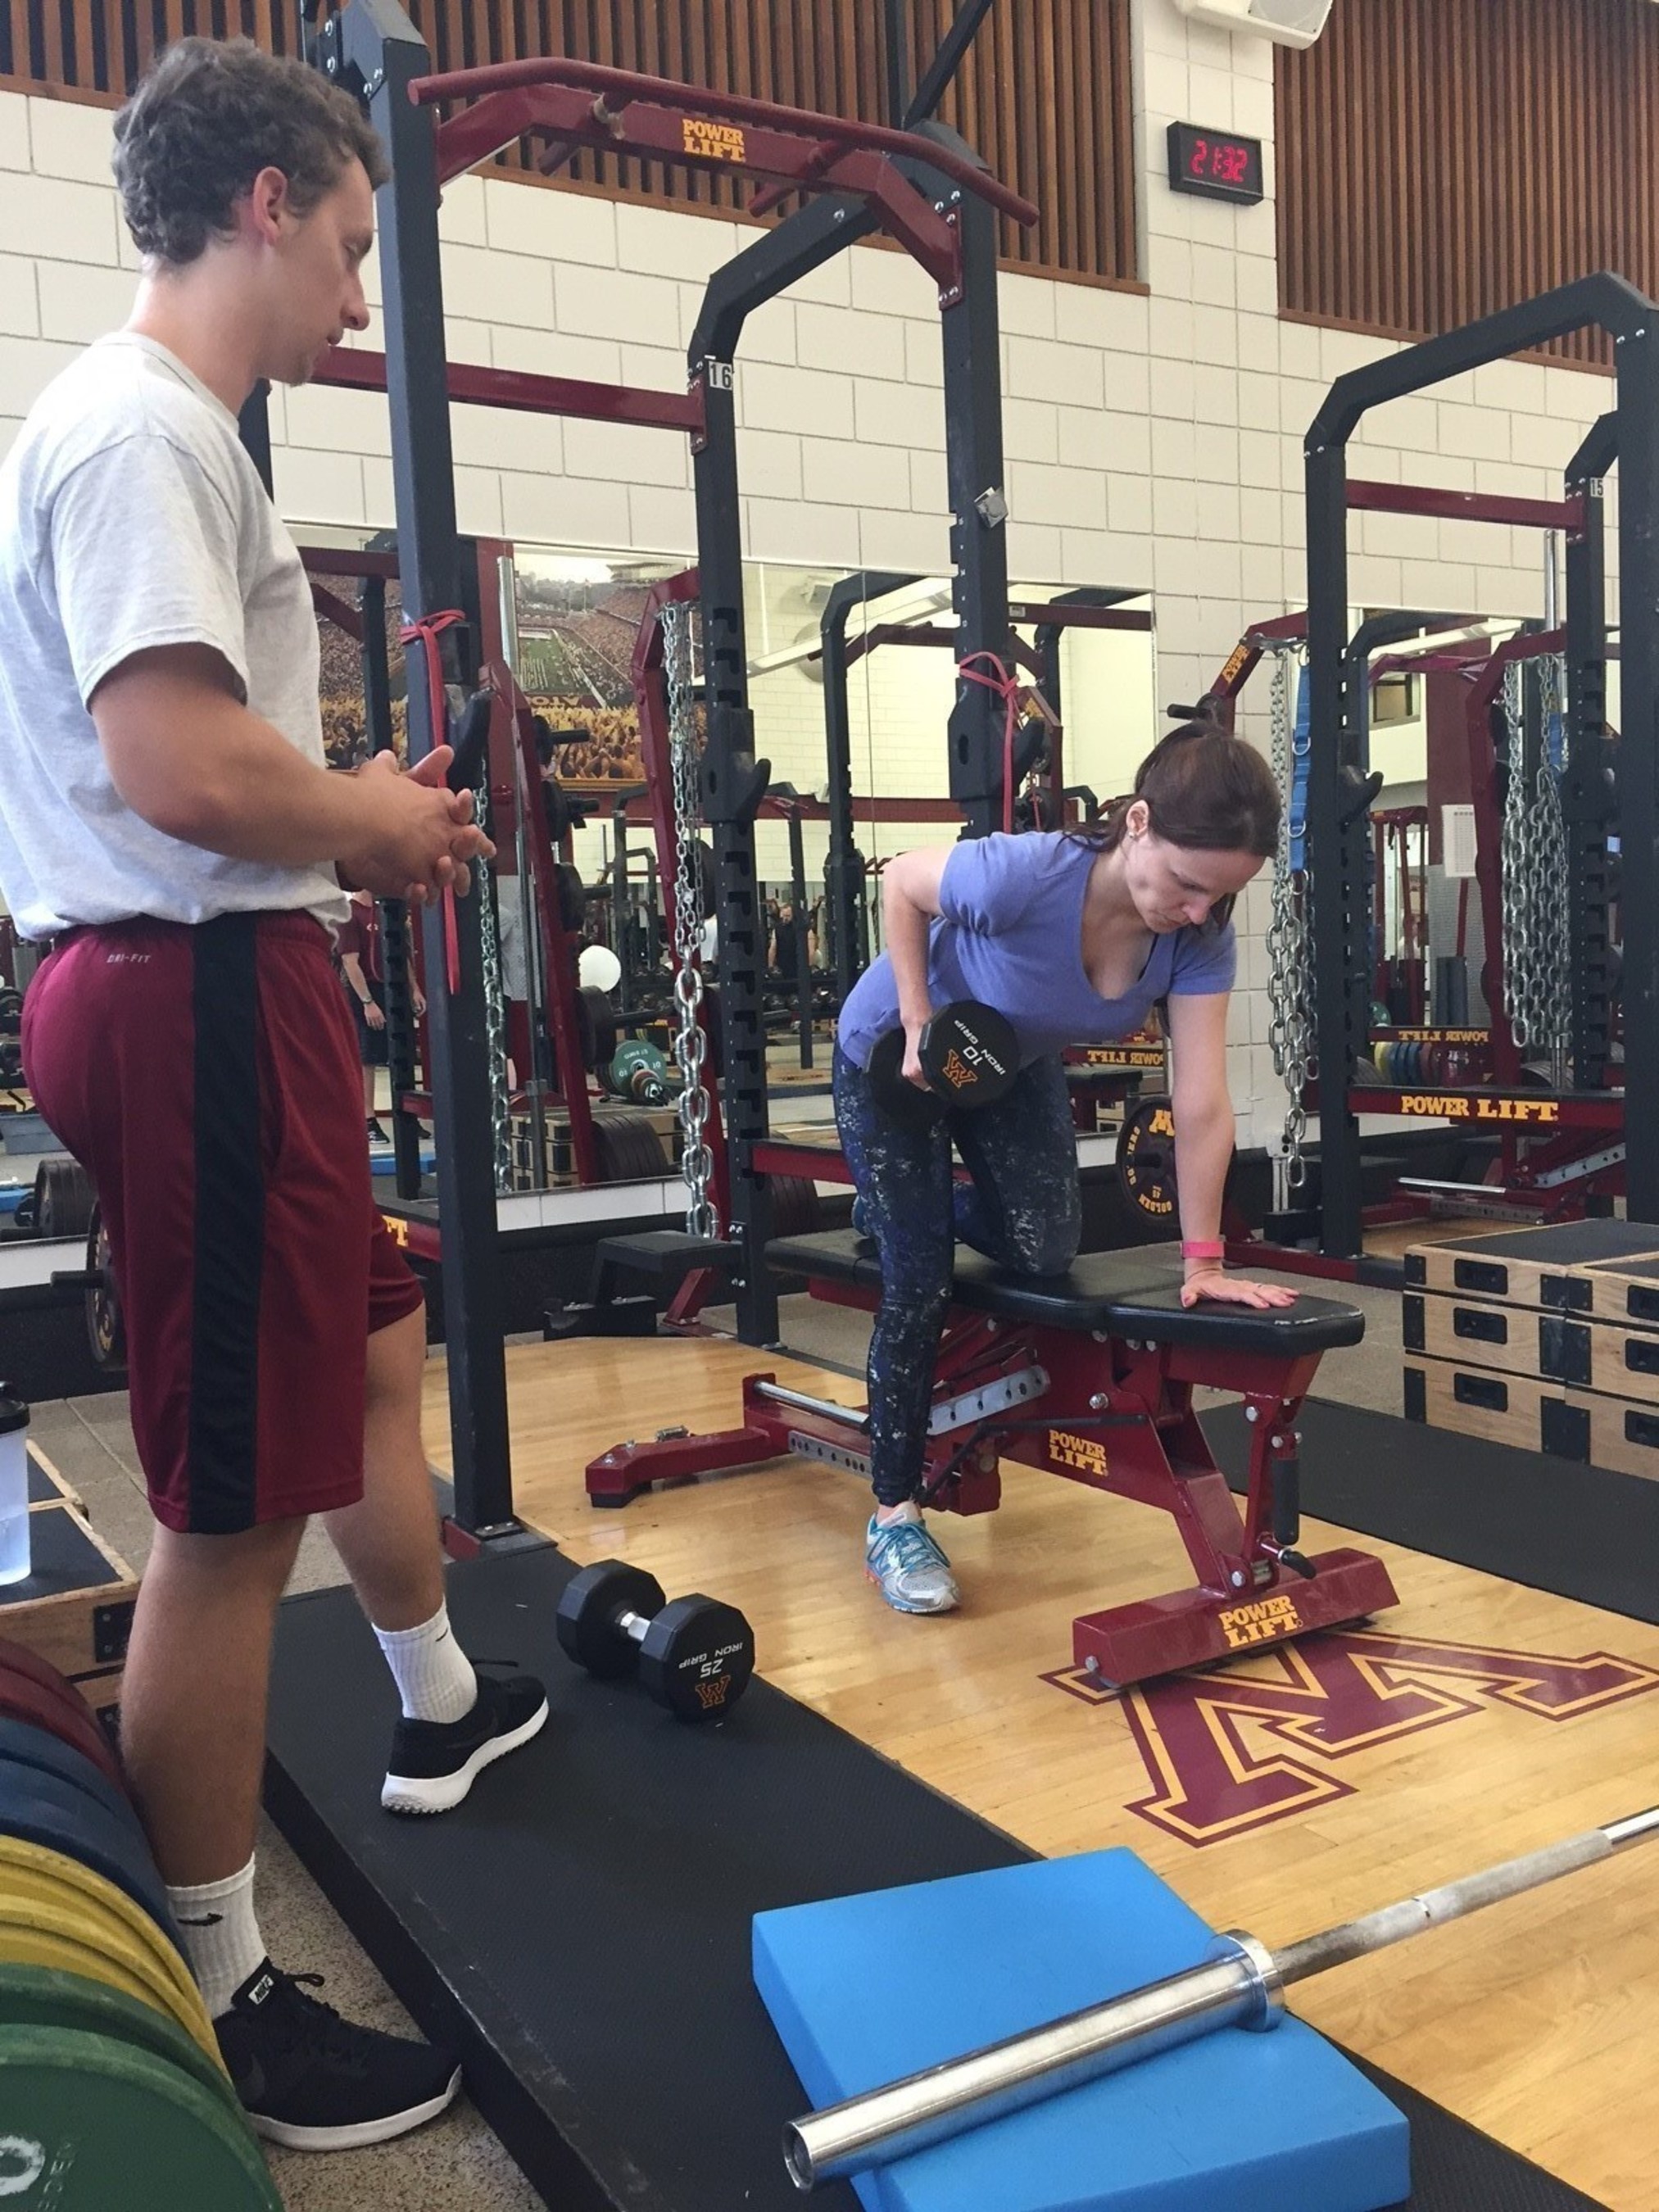 In addition to weight training, Wounded Warrior Project Alumni also received nutritional coaching during an event at the University of Minnesota.